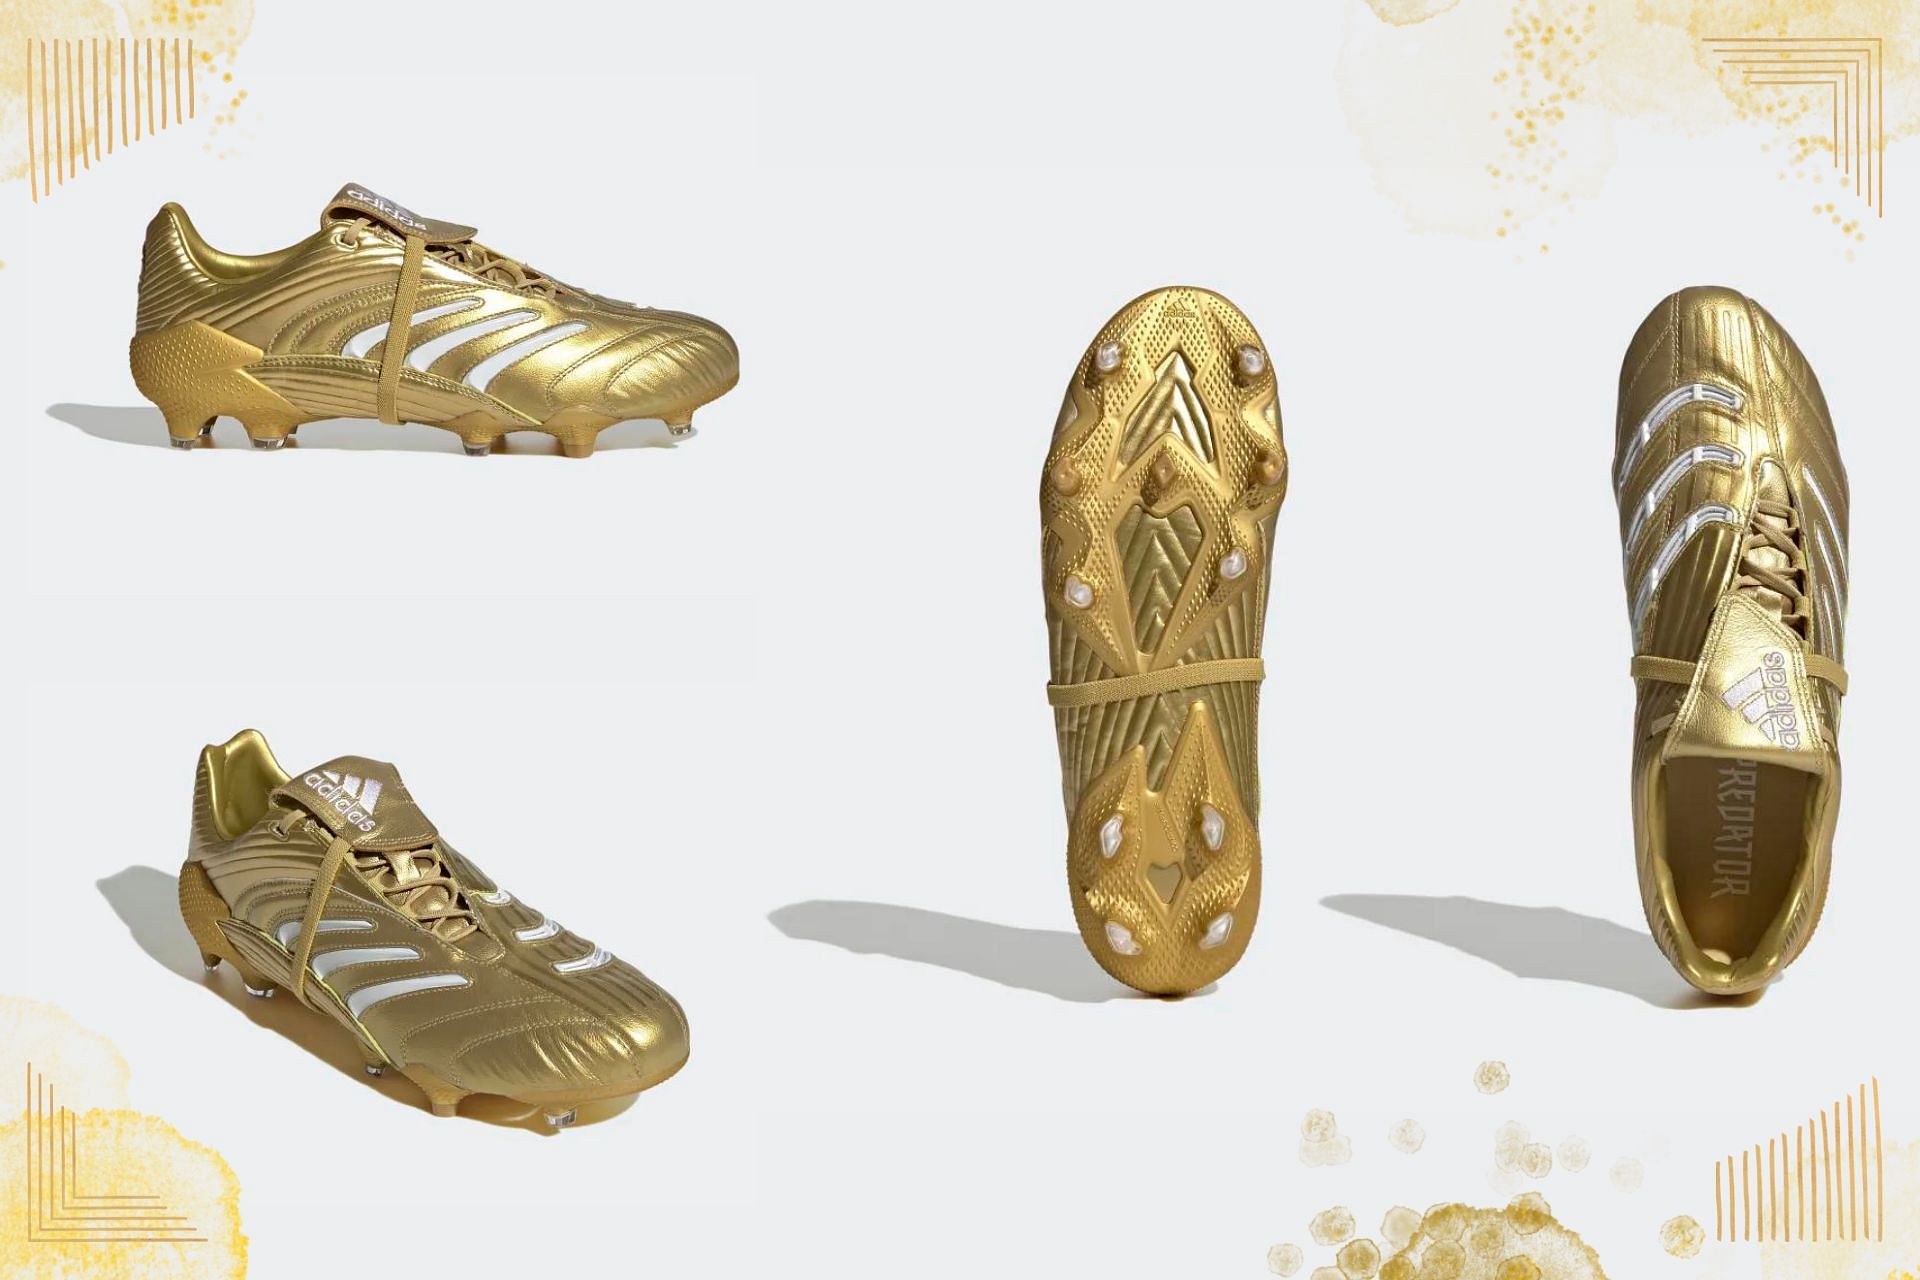 Recently launched Adidas Football&rsquo;s golden Predator absolute firm ground boots reminisce the 2006 Zidane worn cleats (image via Sportskeeda)